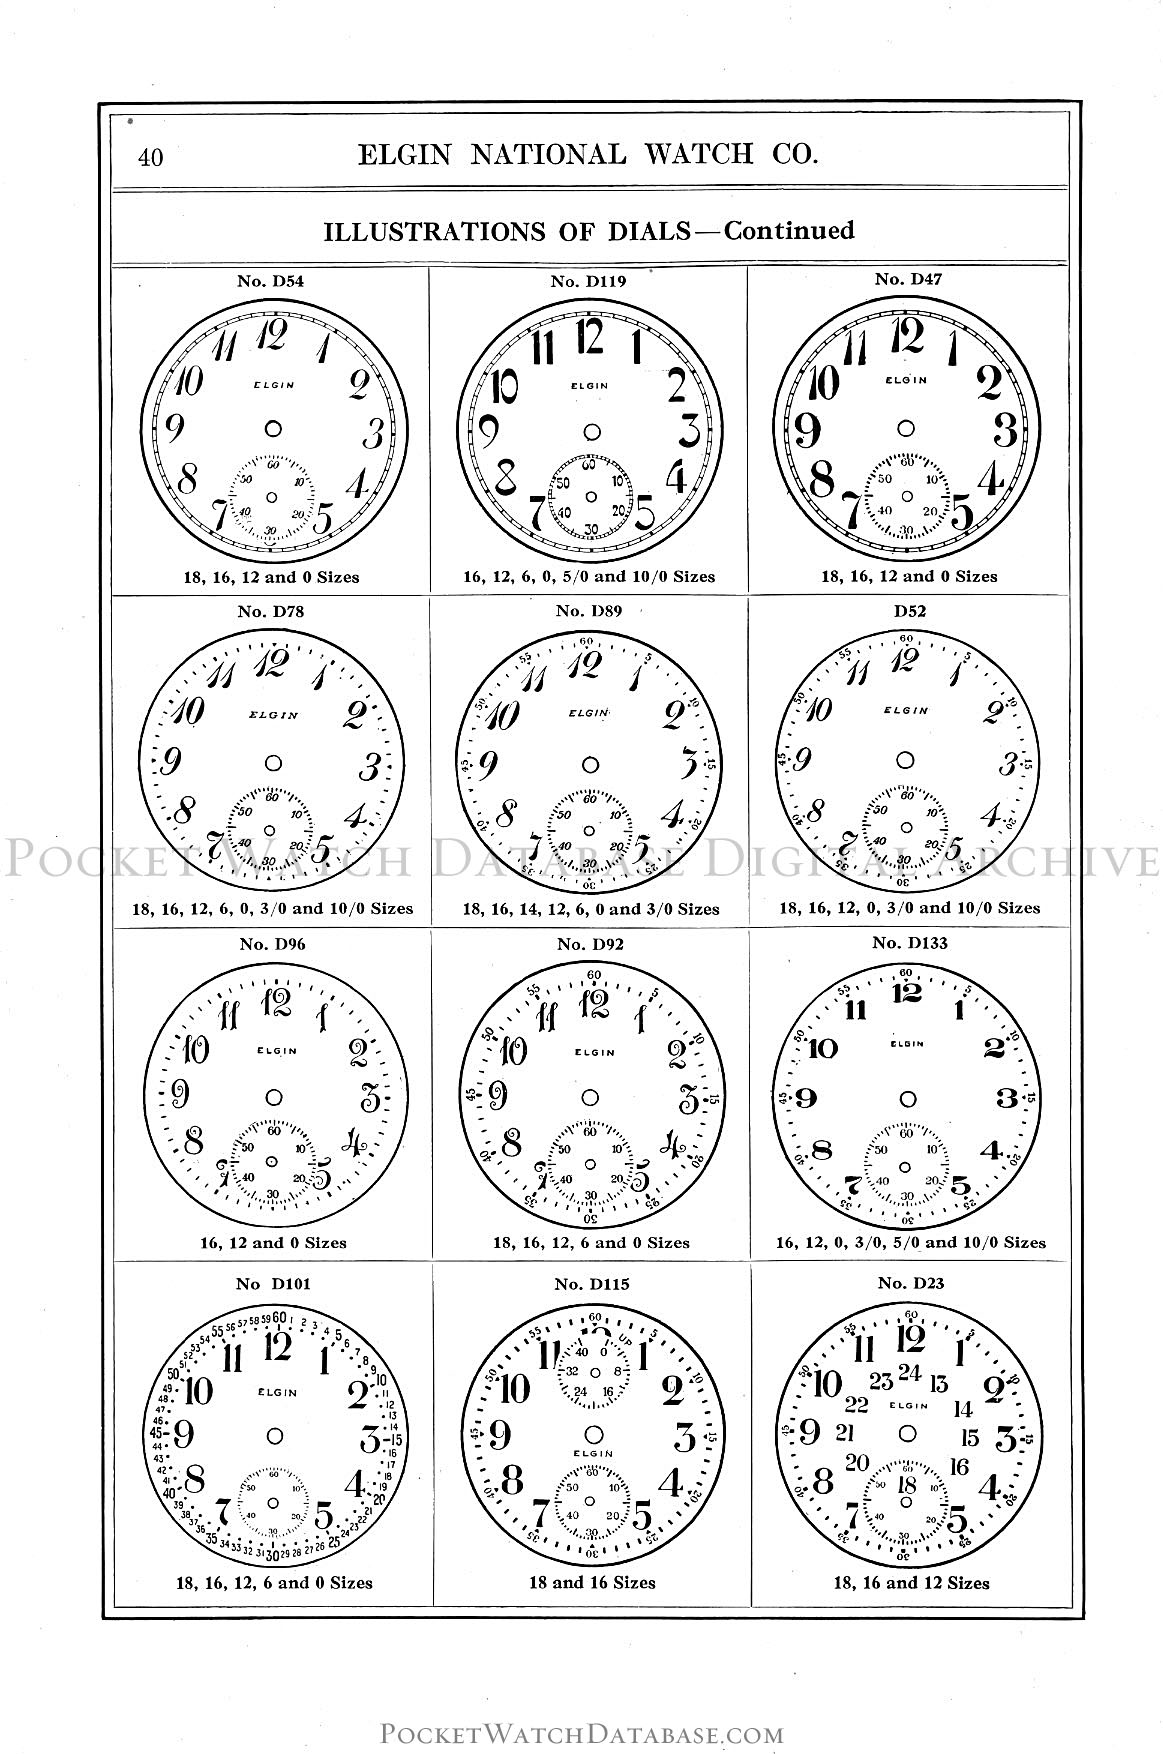 Illustrations of Dials - Net Price List of Materials Manufactured 